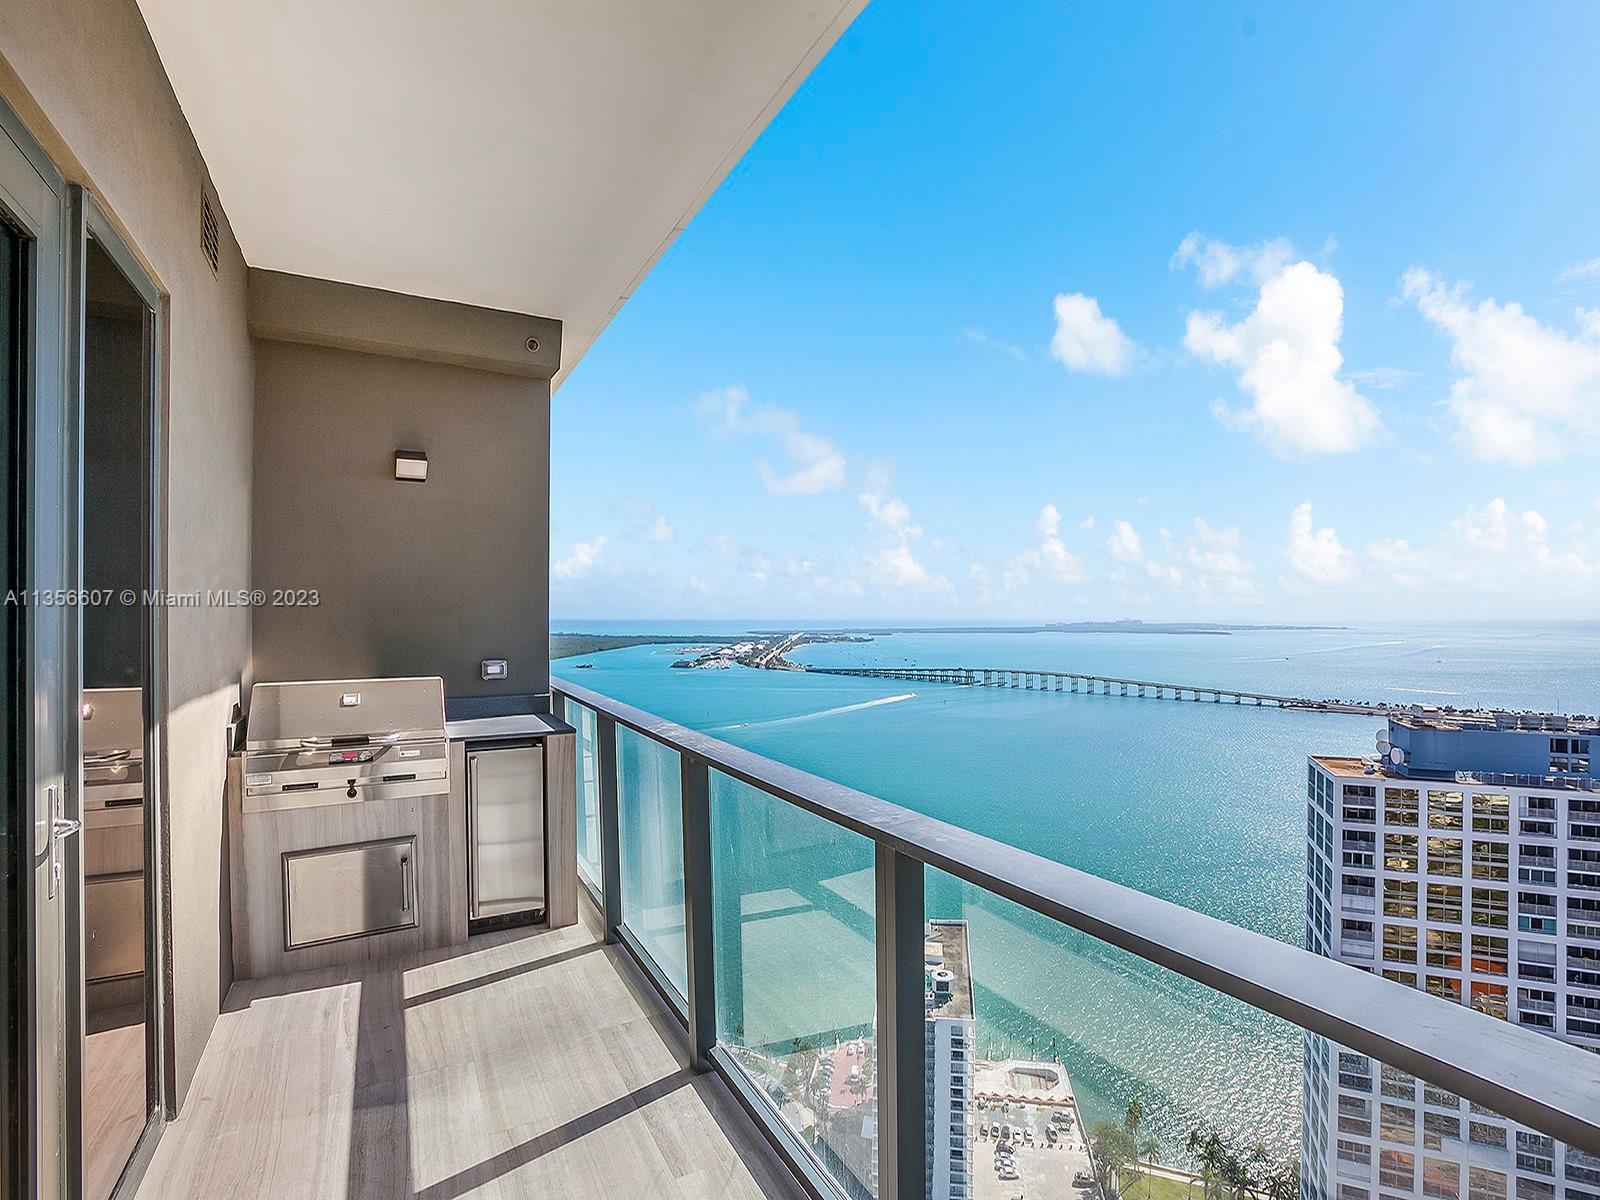 Incredible bay and city views, spectacular 2BED/2.5BATH corner unit at Echo Brickell, a boutique hig